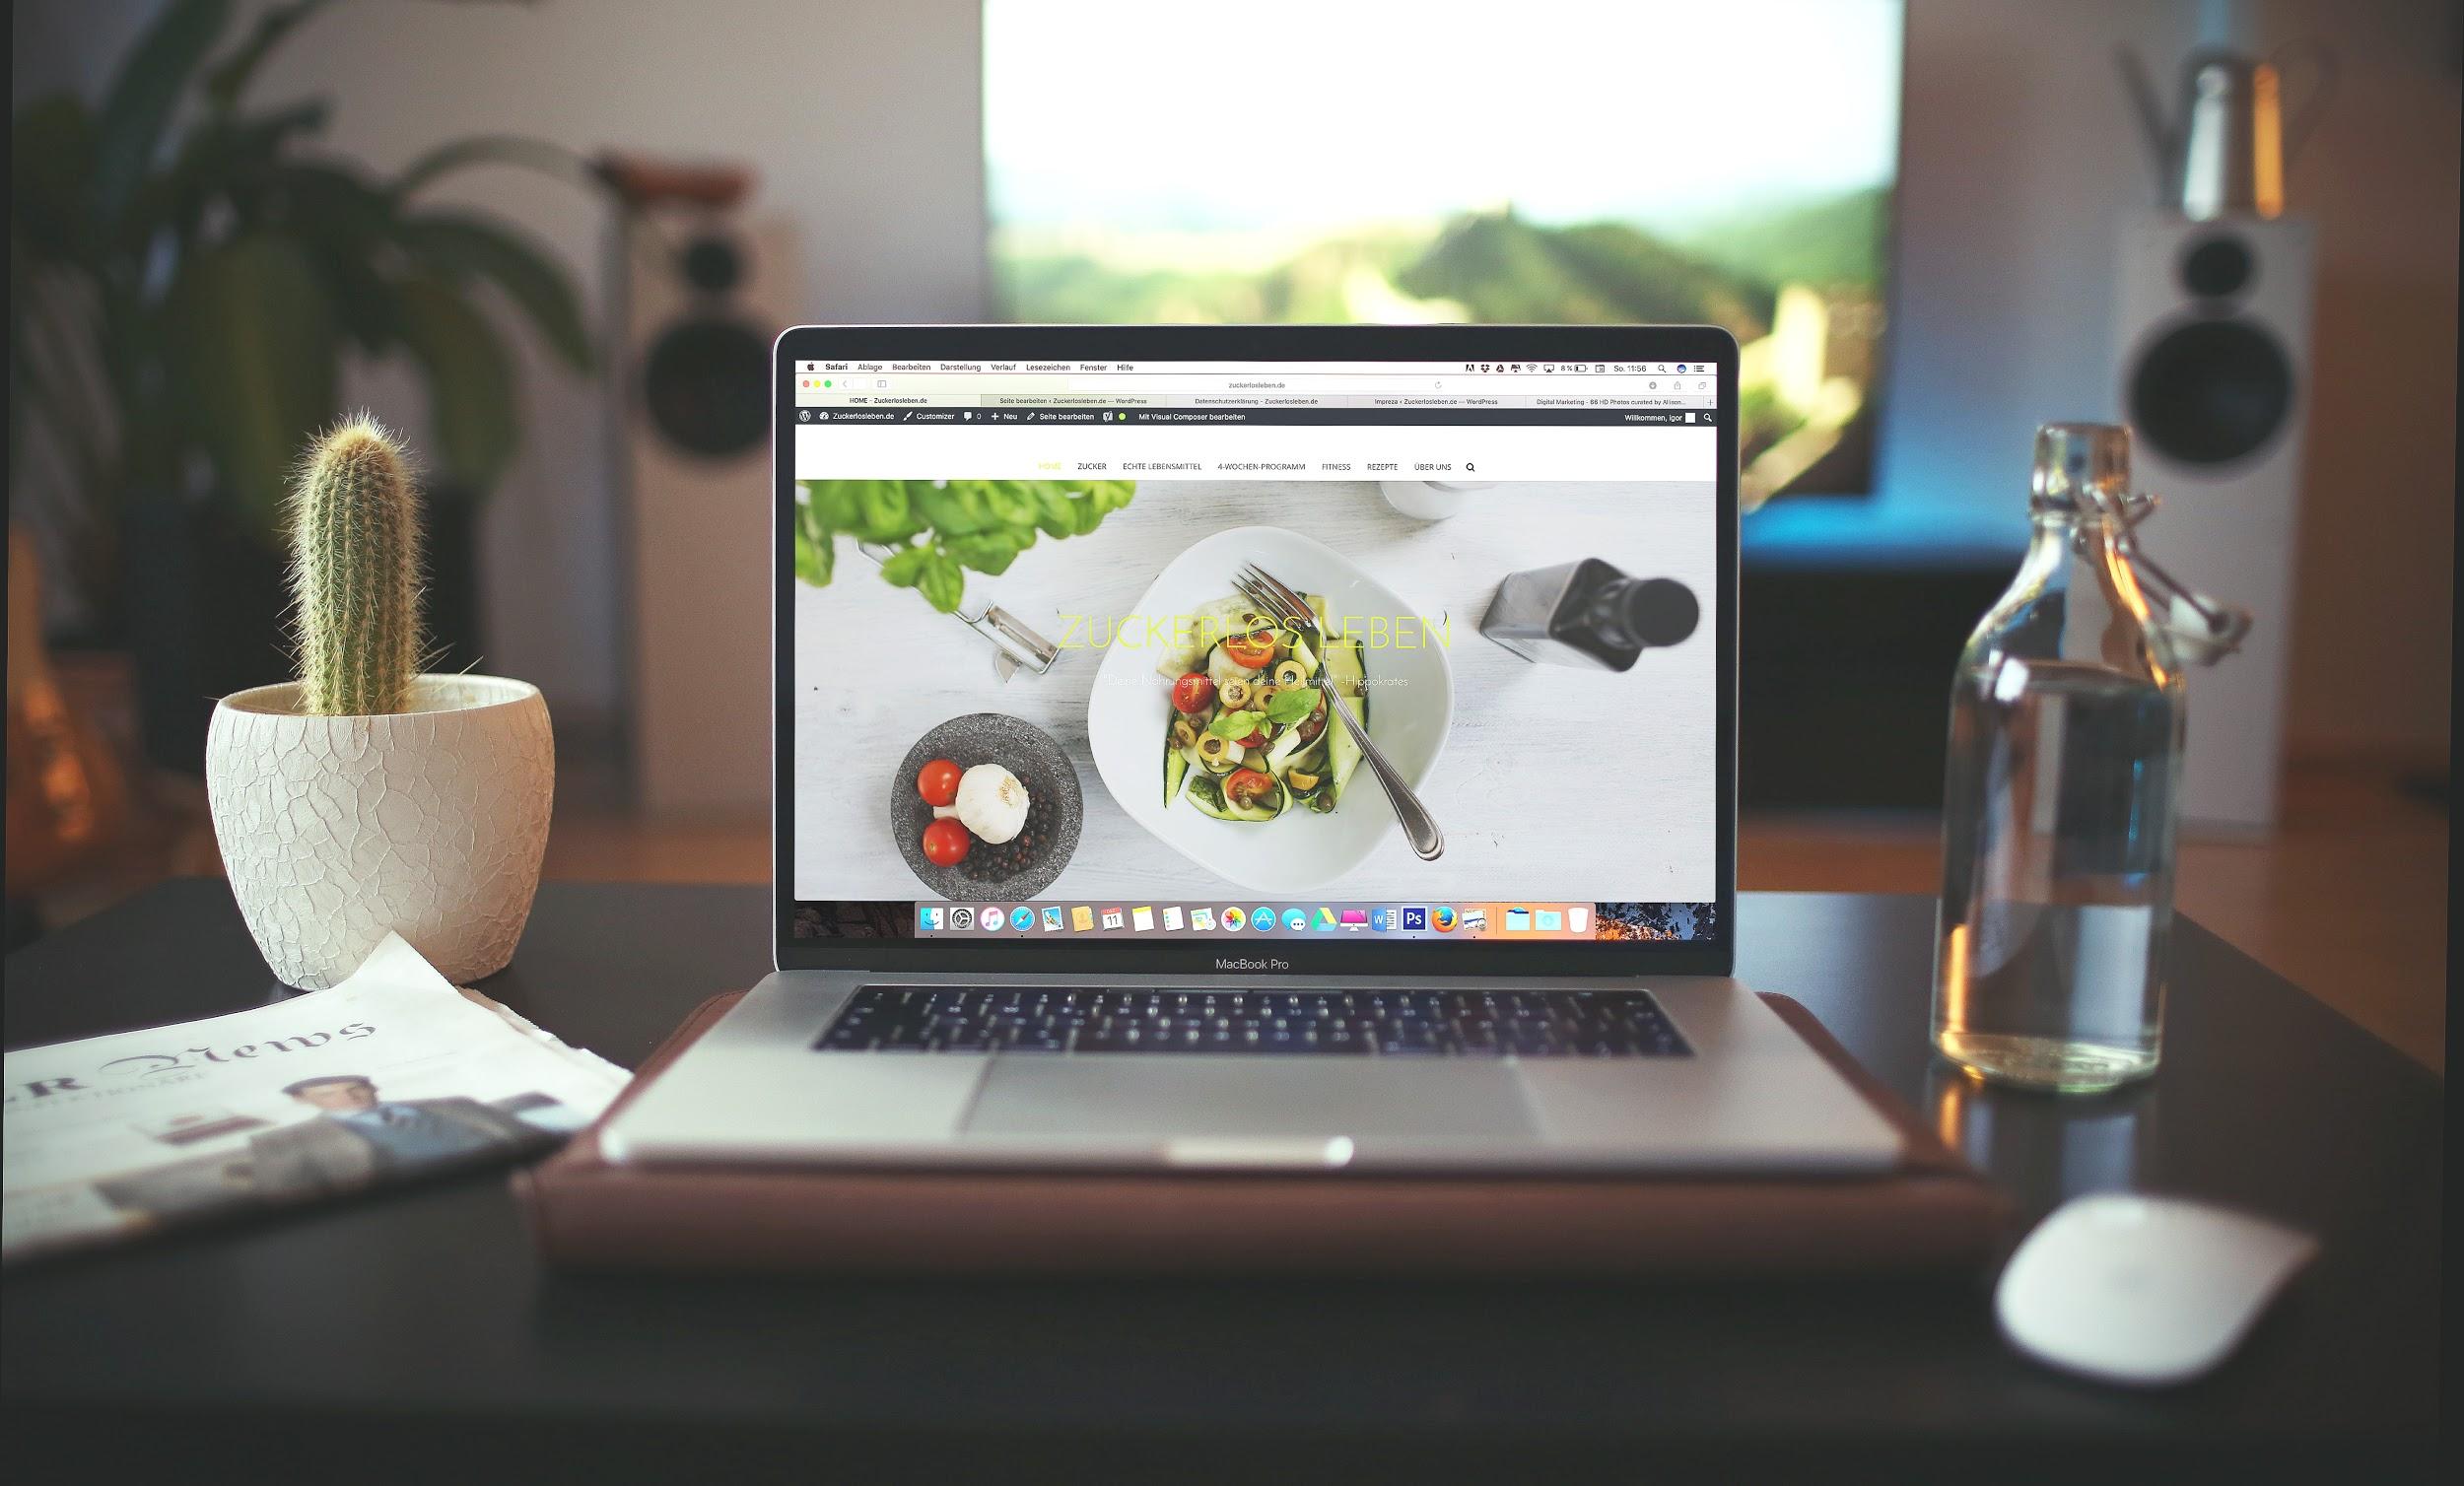 A laptop sits open on a desk showing a website with a bowl of vegetables. The desk also contains a plant, a newspaper, and a glass of water.